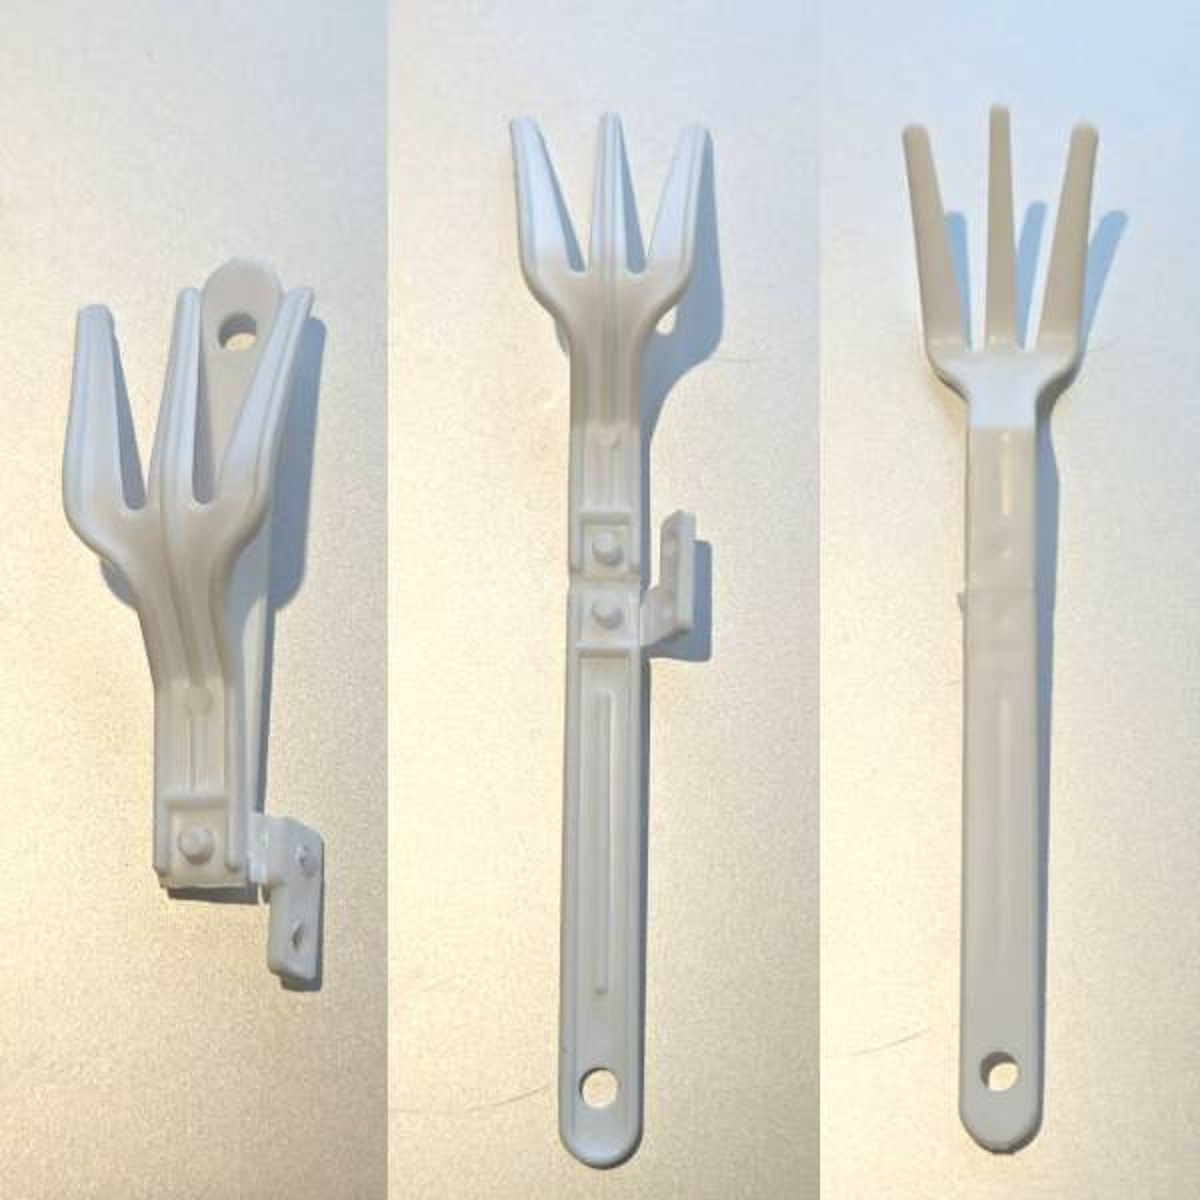 "My son's Cup-o-Phở included a foldable fork/threek"